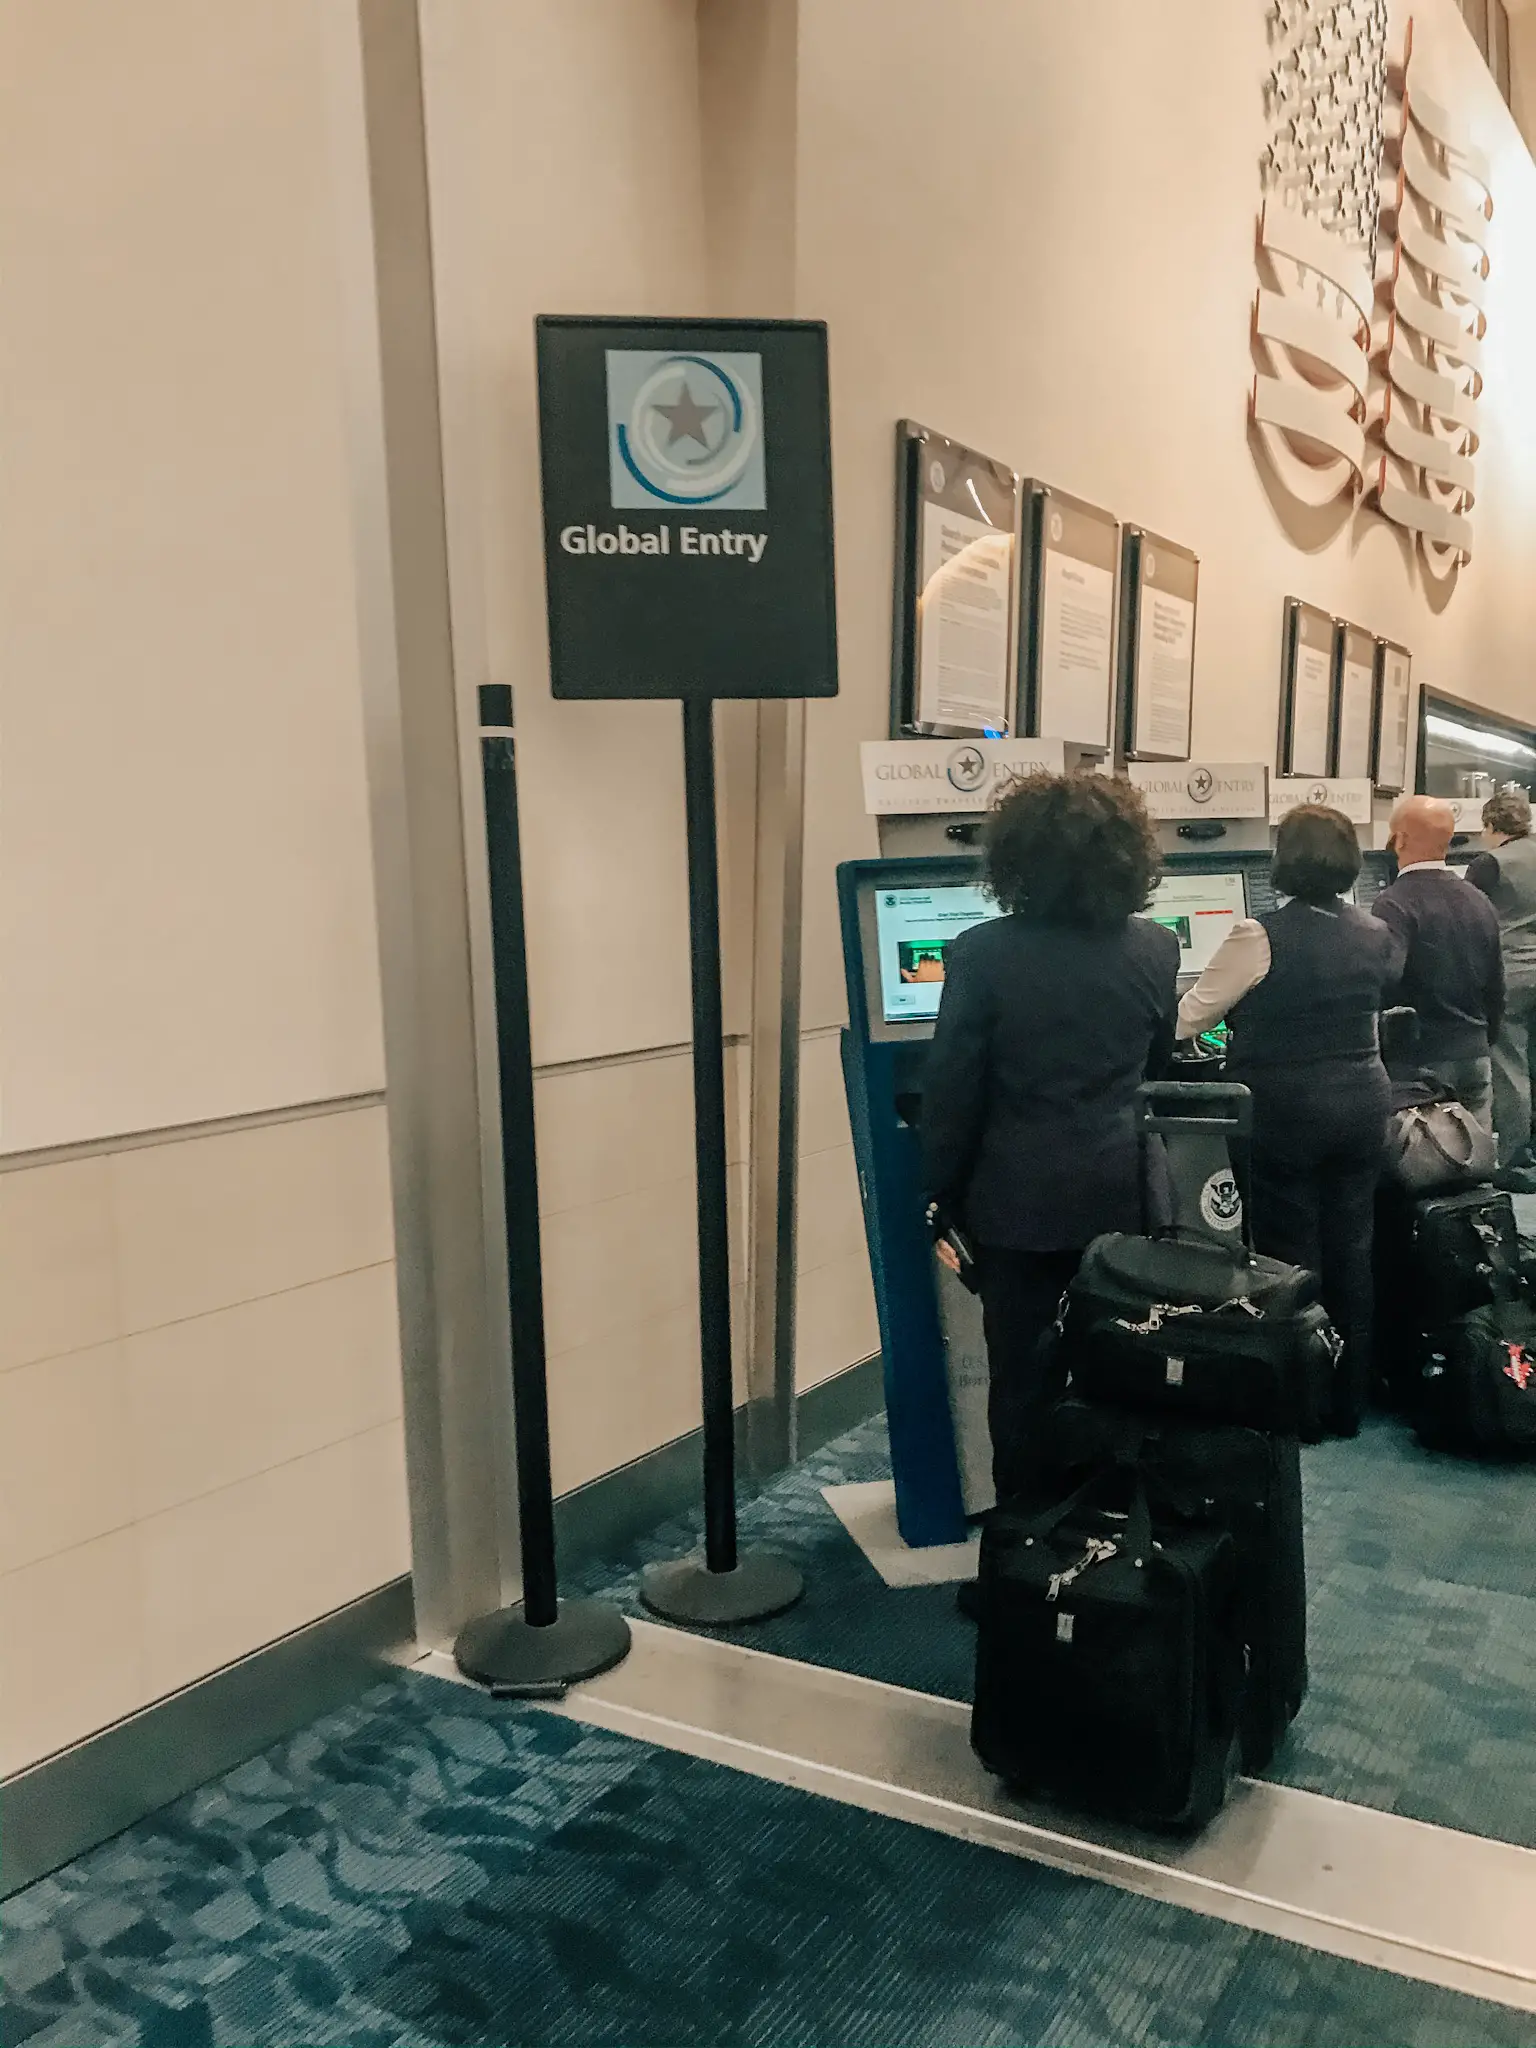 global entry process kiosks at airport